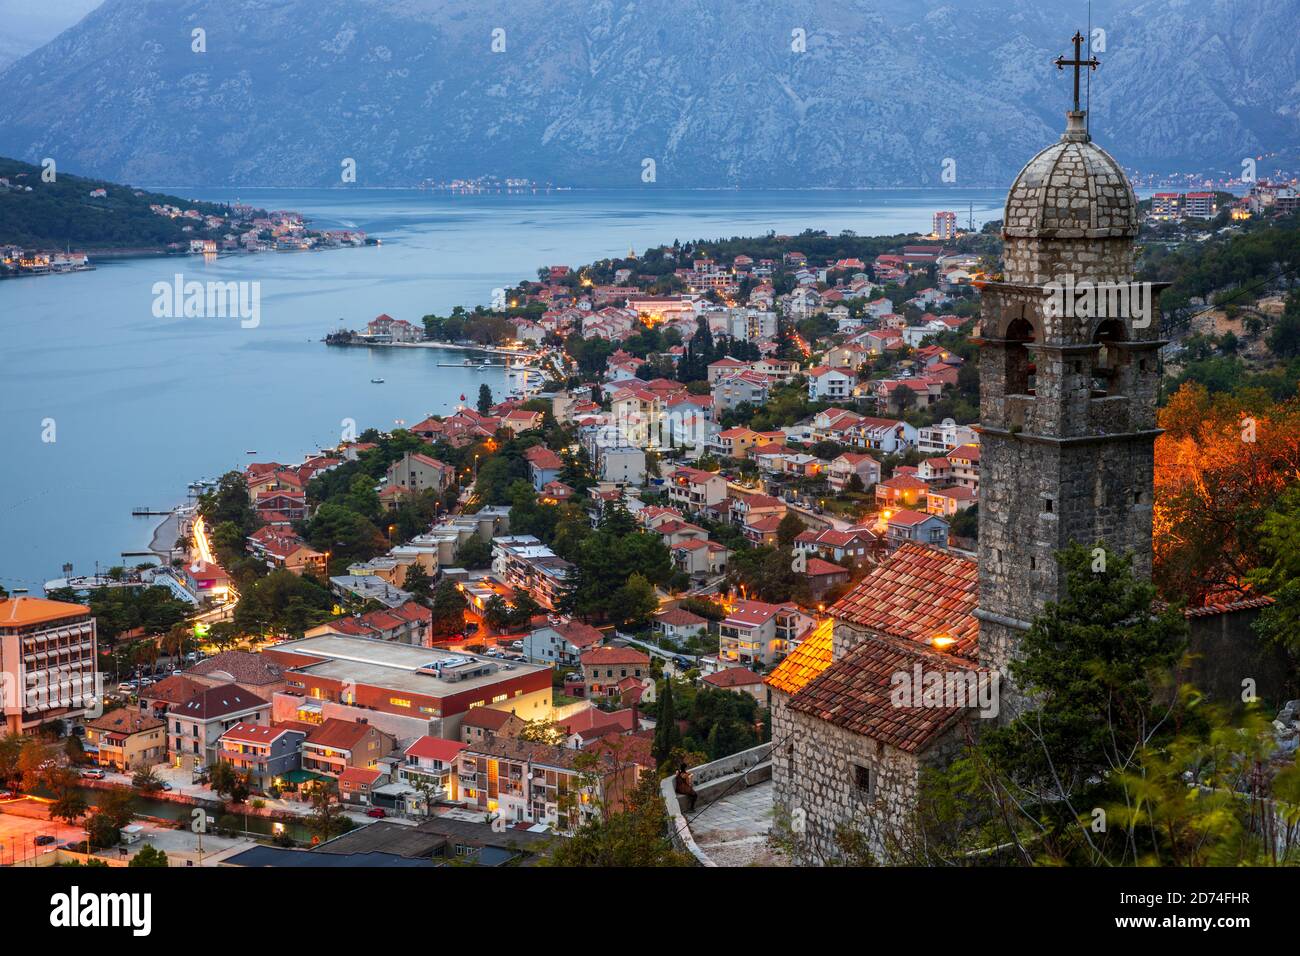 Night view of the Church of our Lady of Remedy,  located on the 240th metre altitude of the Ladder of Kotor on the way to the St John Fortress. Stock Photo